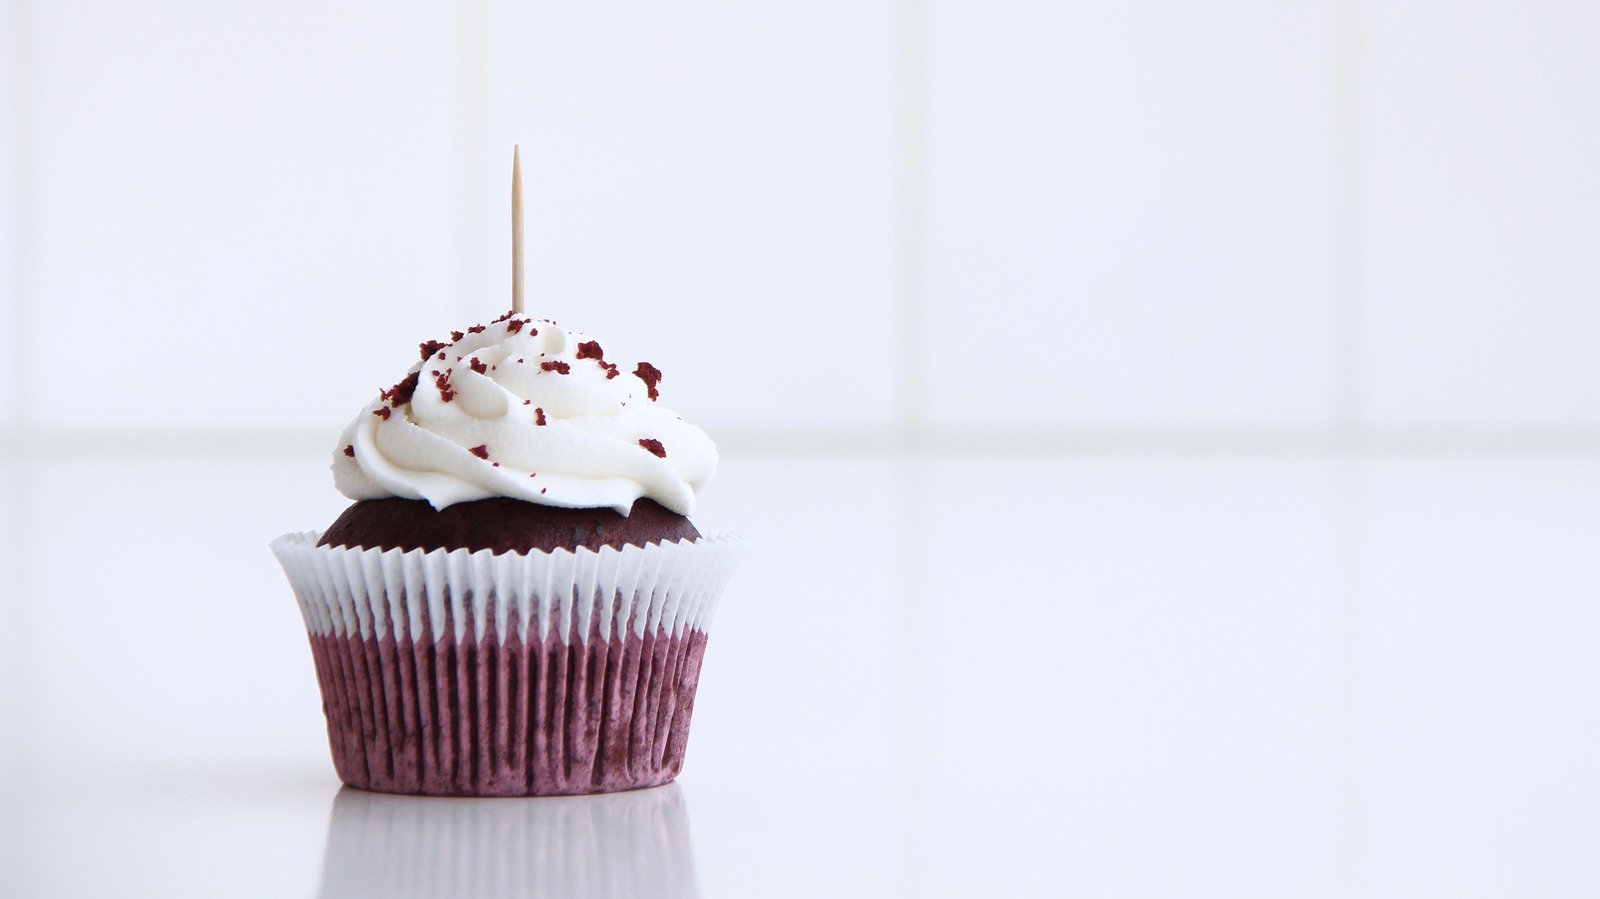 TSA Once Confiscated A Traveler's Cupcake, Here's The Reason Why